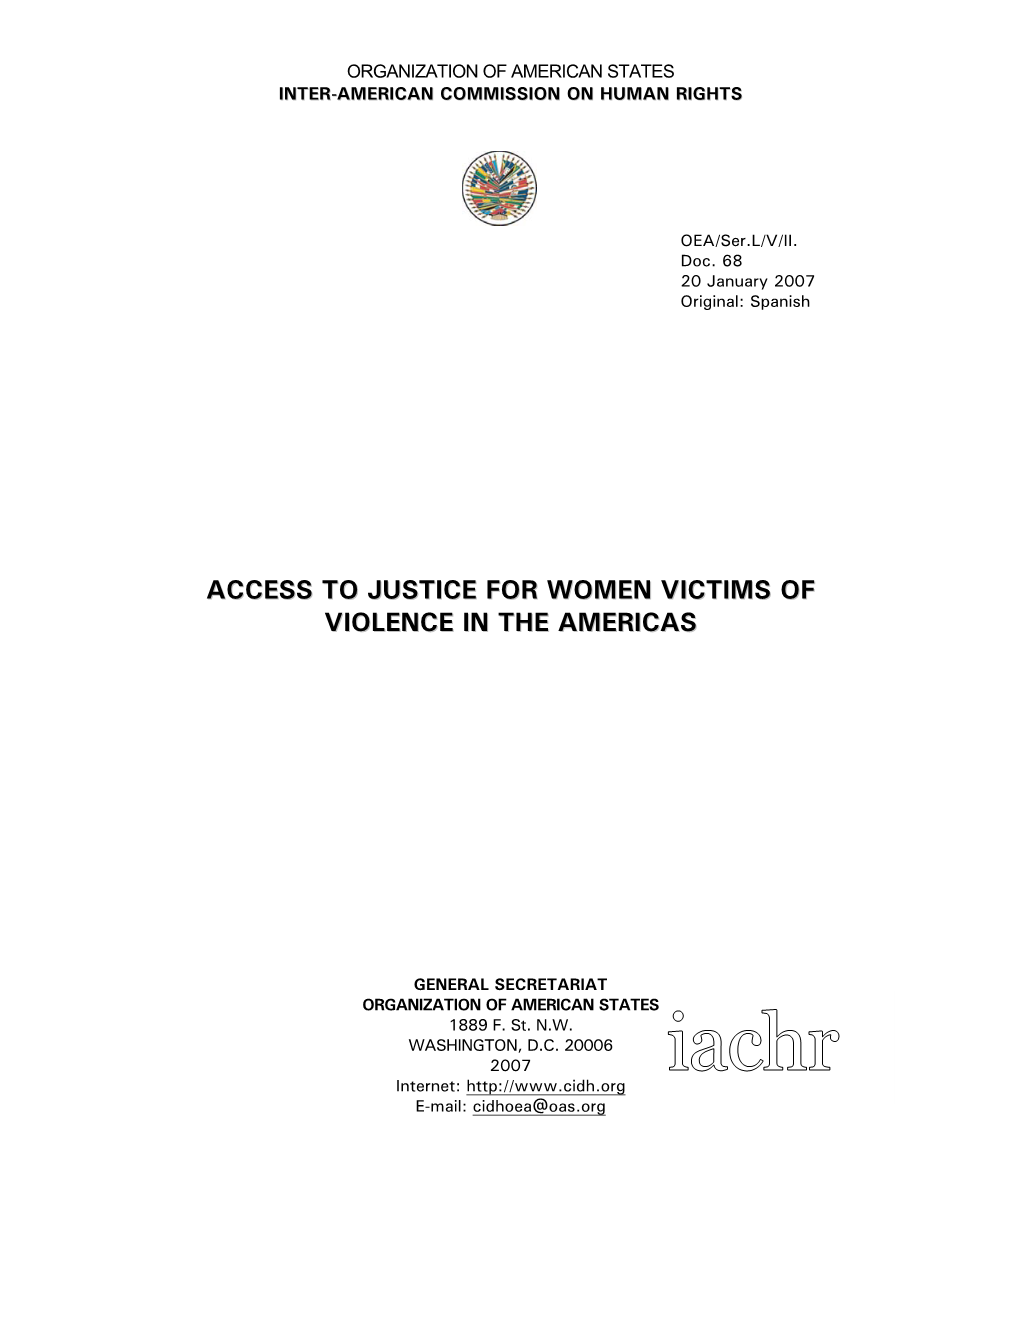 Access to Justice for Women Victims of Violence in the Americas